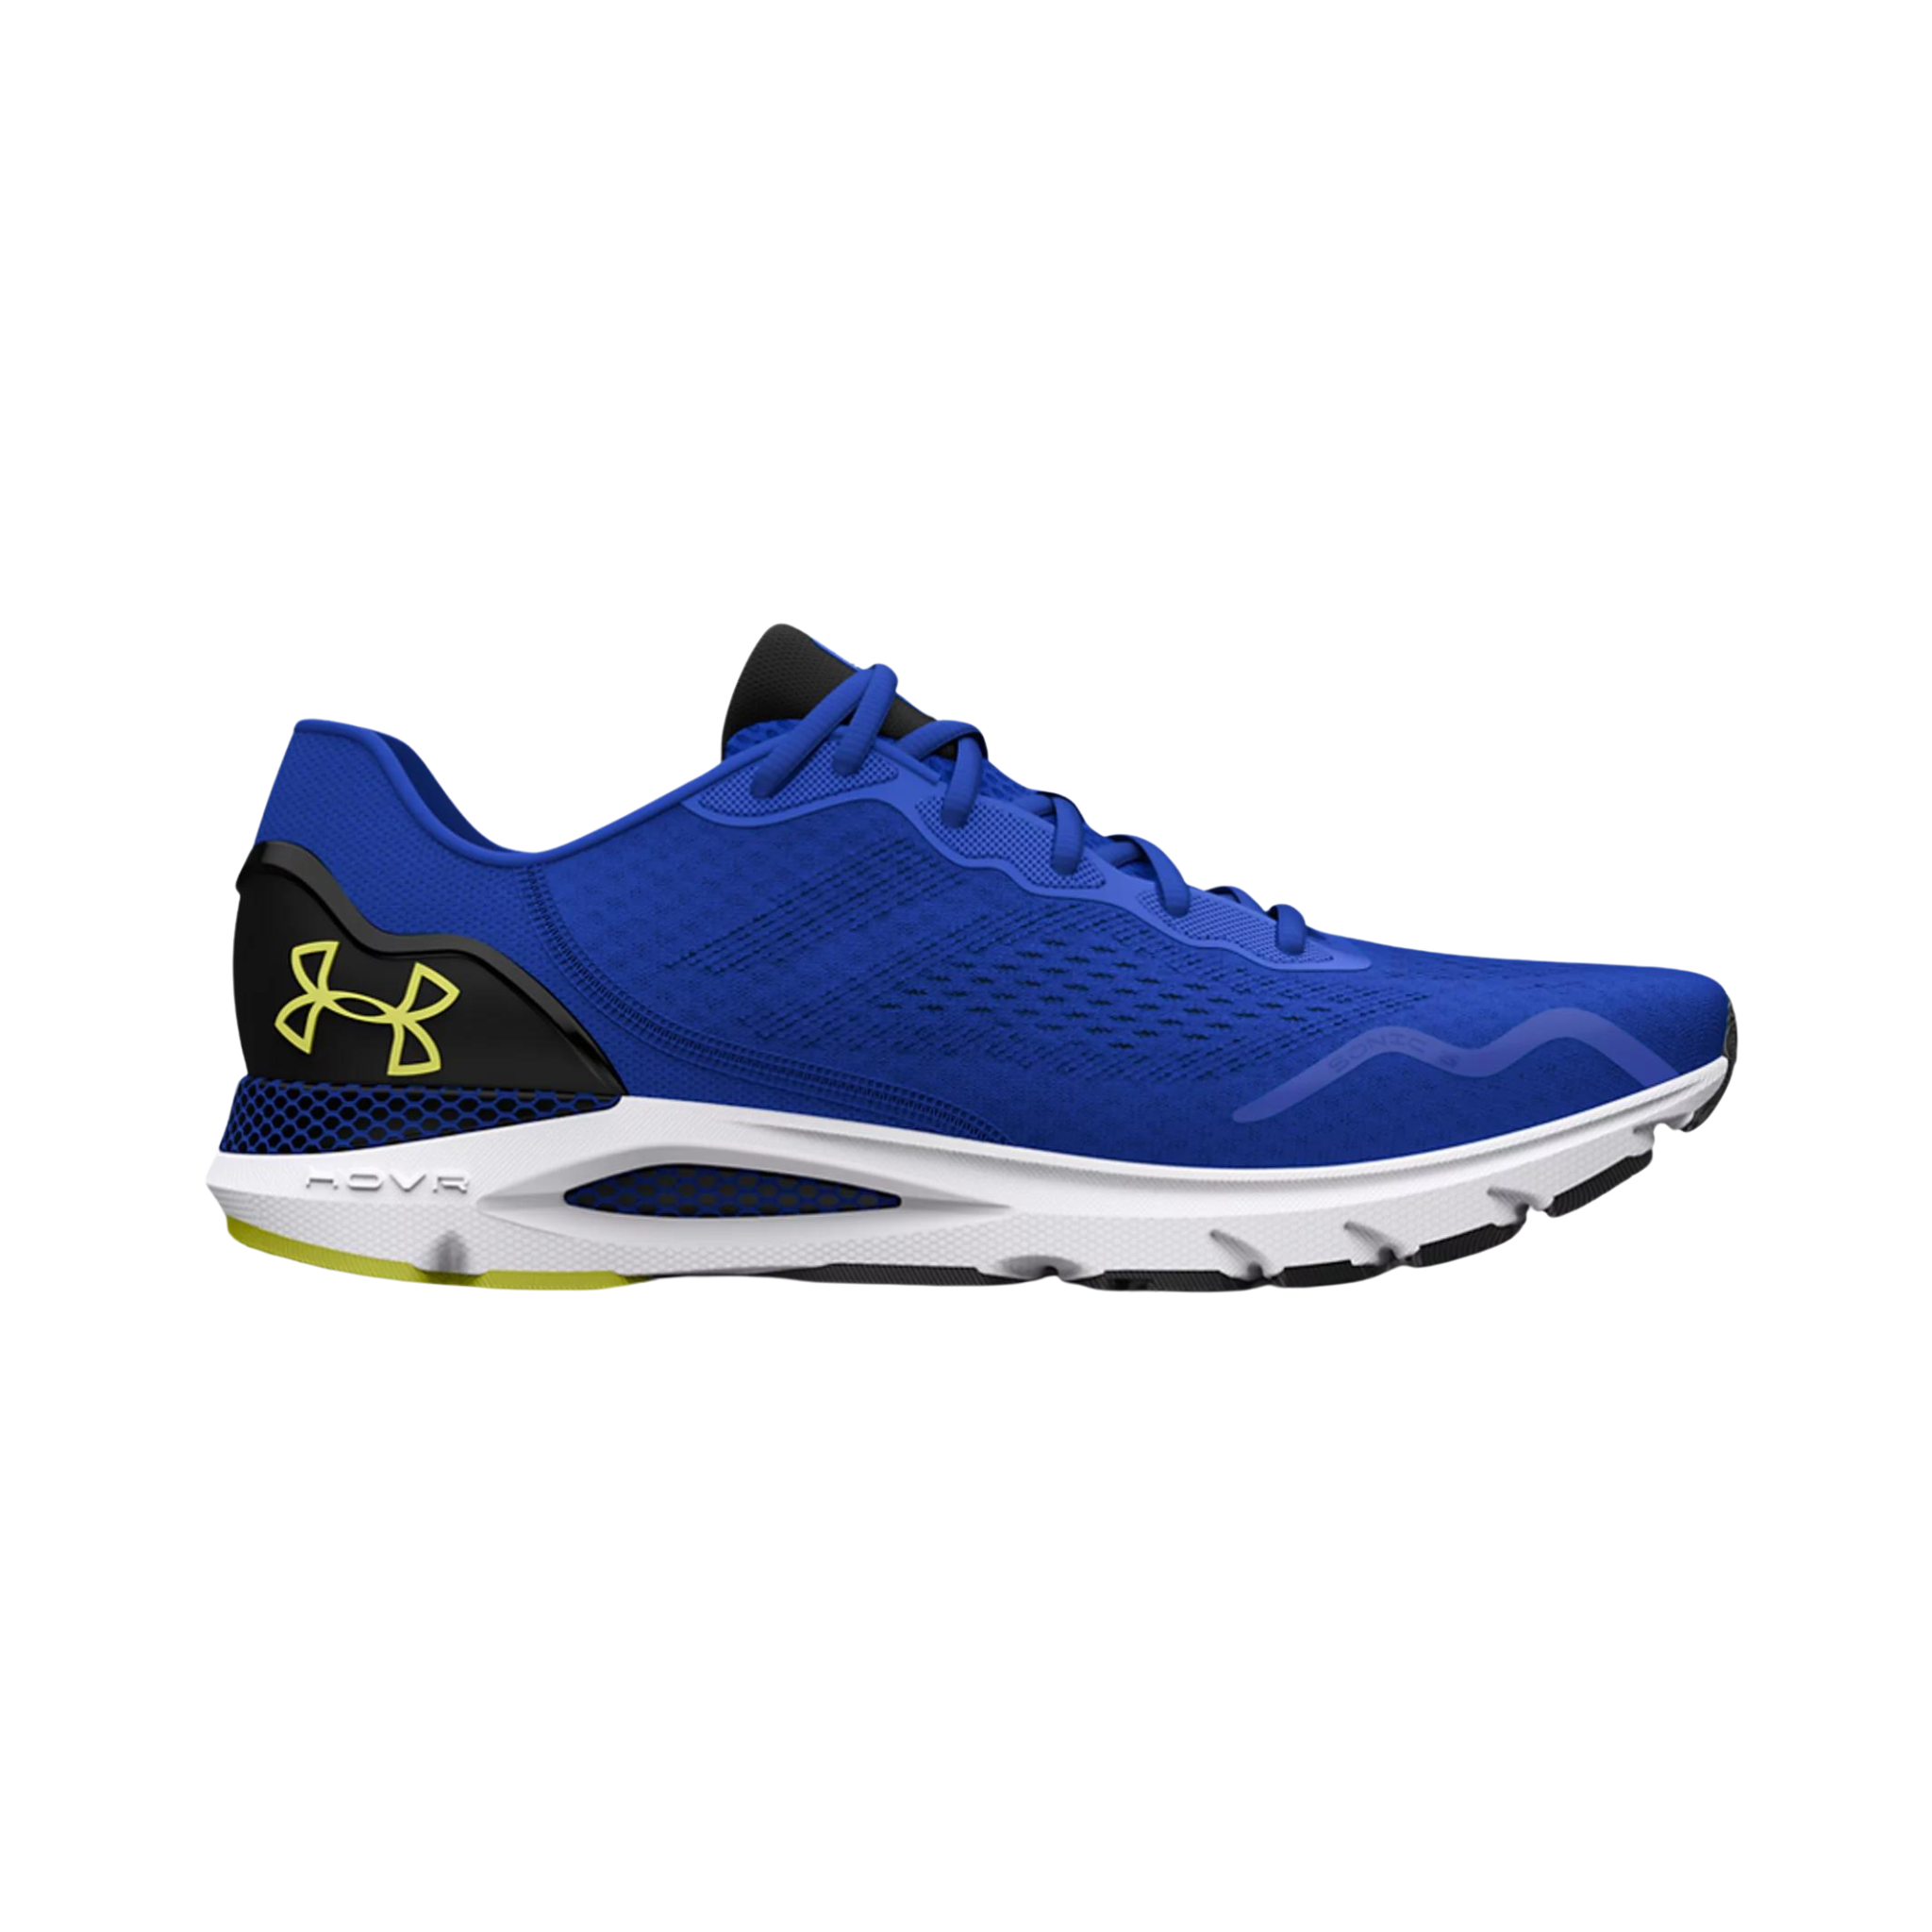 Up To 60% Off + An Extra 30% Off From Under Armour